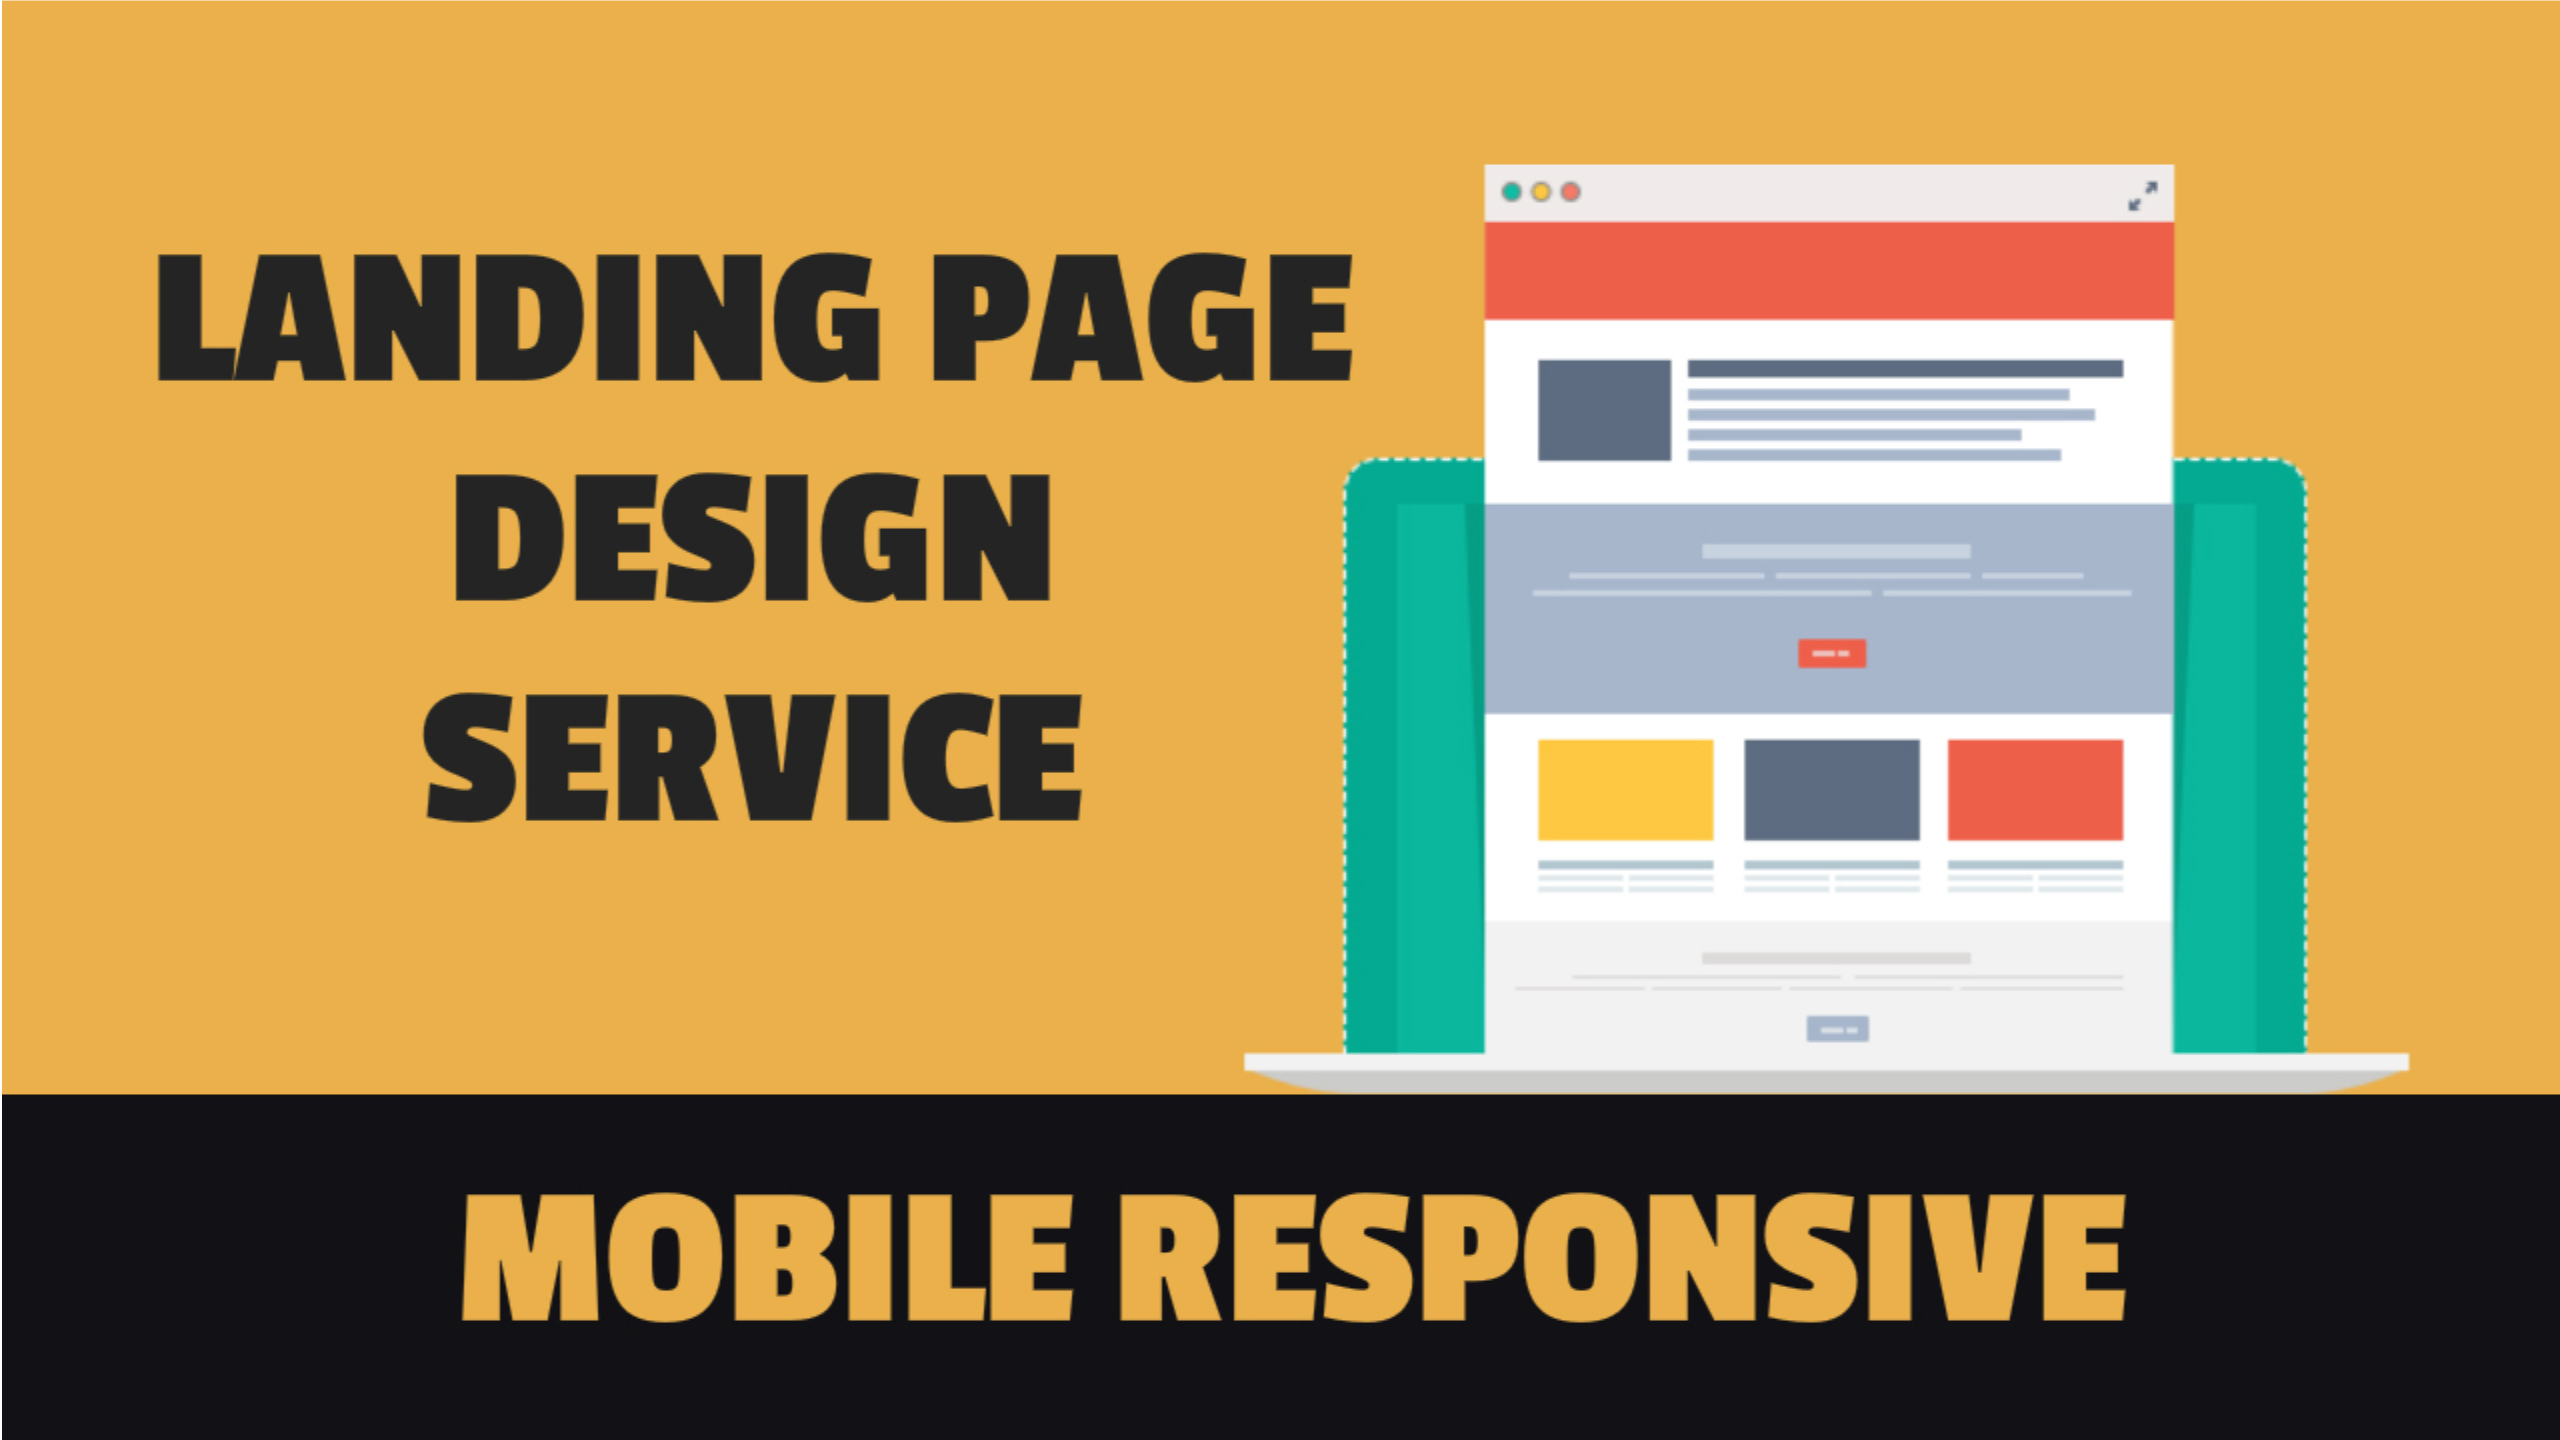 Unique Landing Page Designs Can Make A Website More Engaging And Drive In More Traffic For Better Conversions And Thus Enhancing The Business